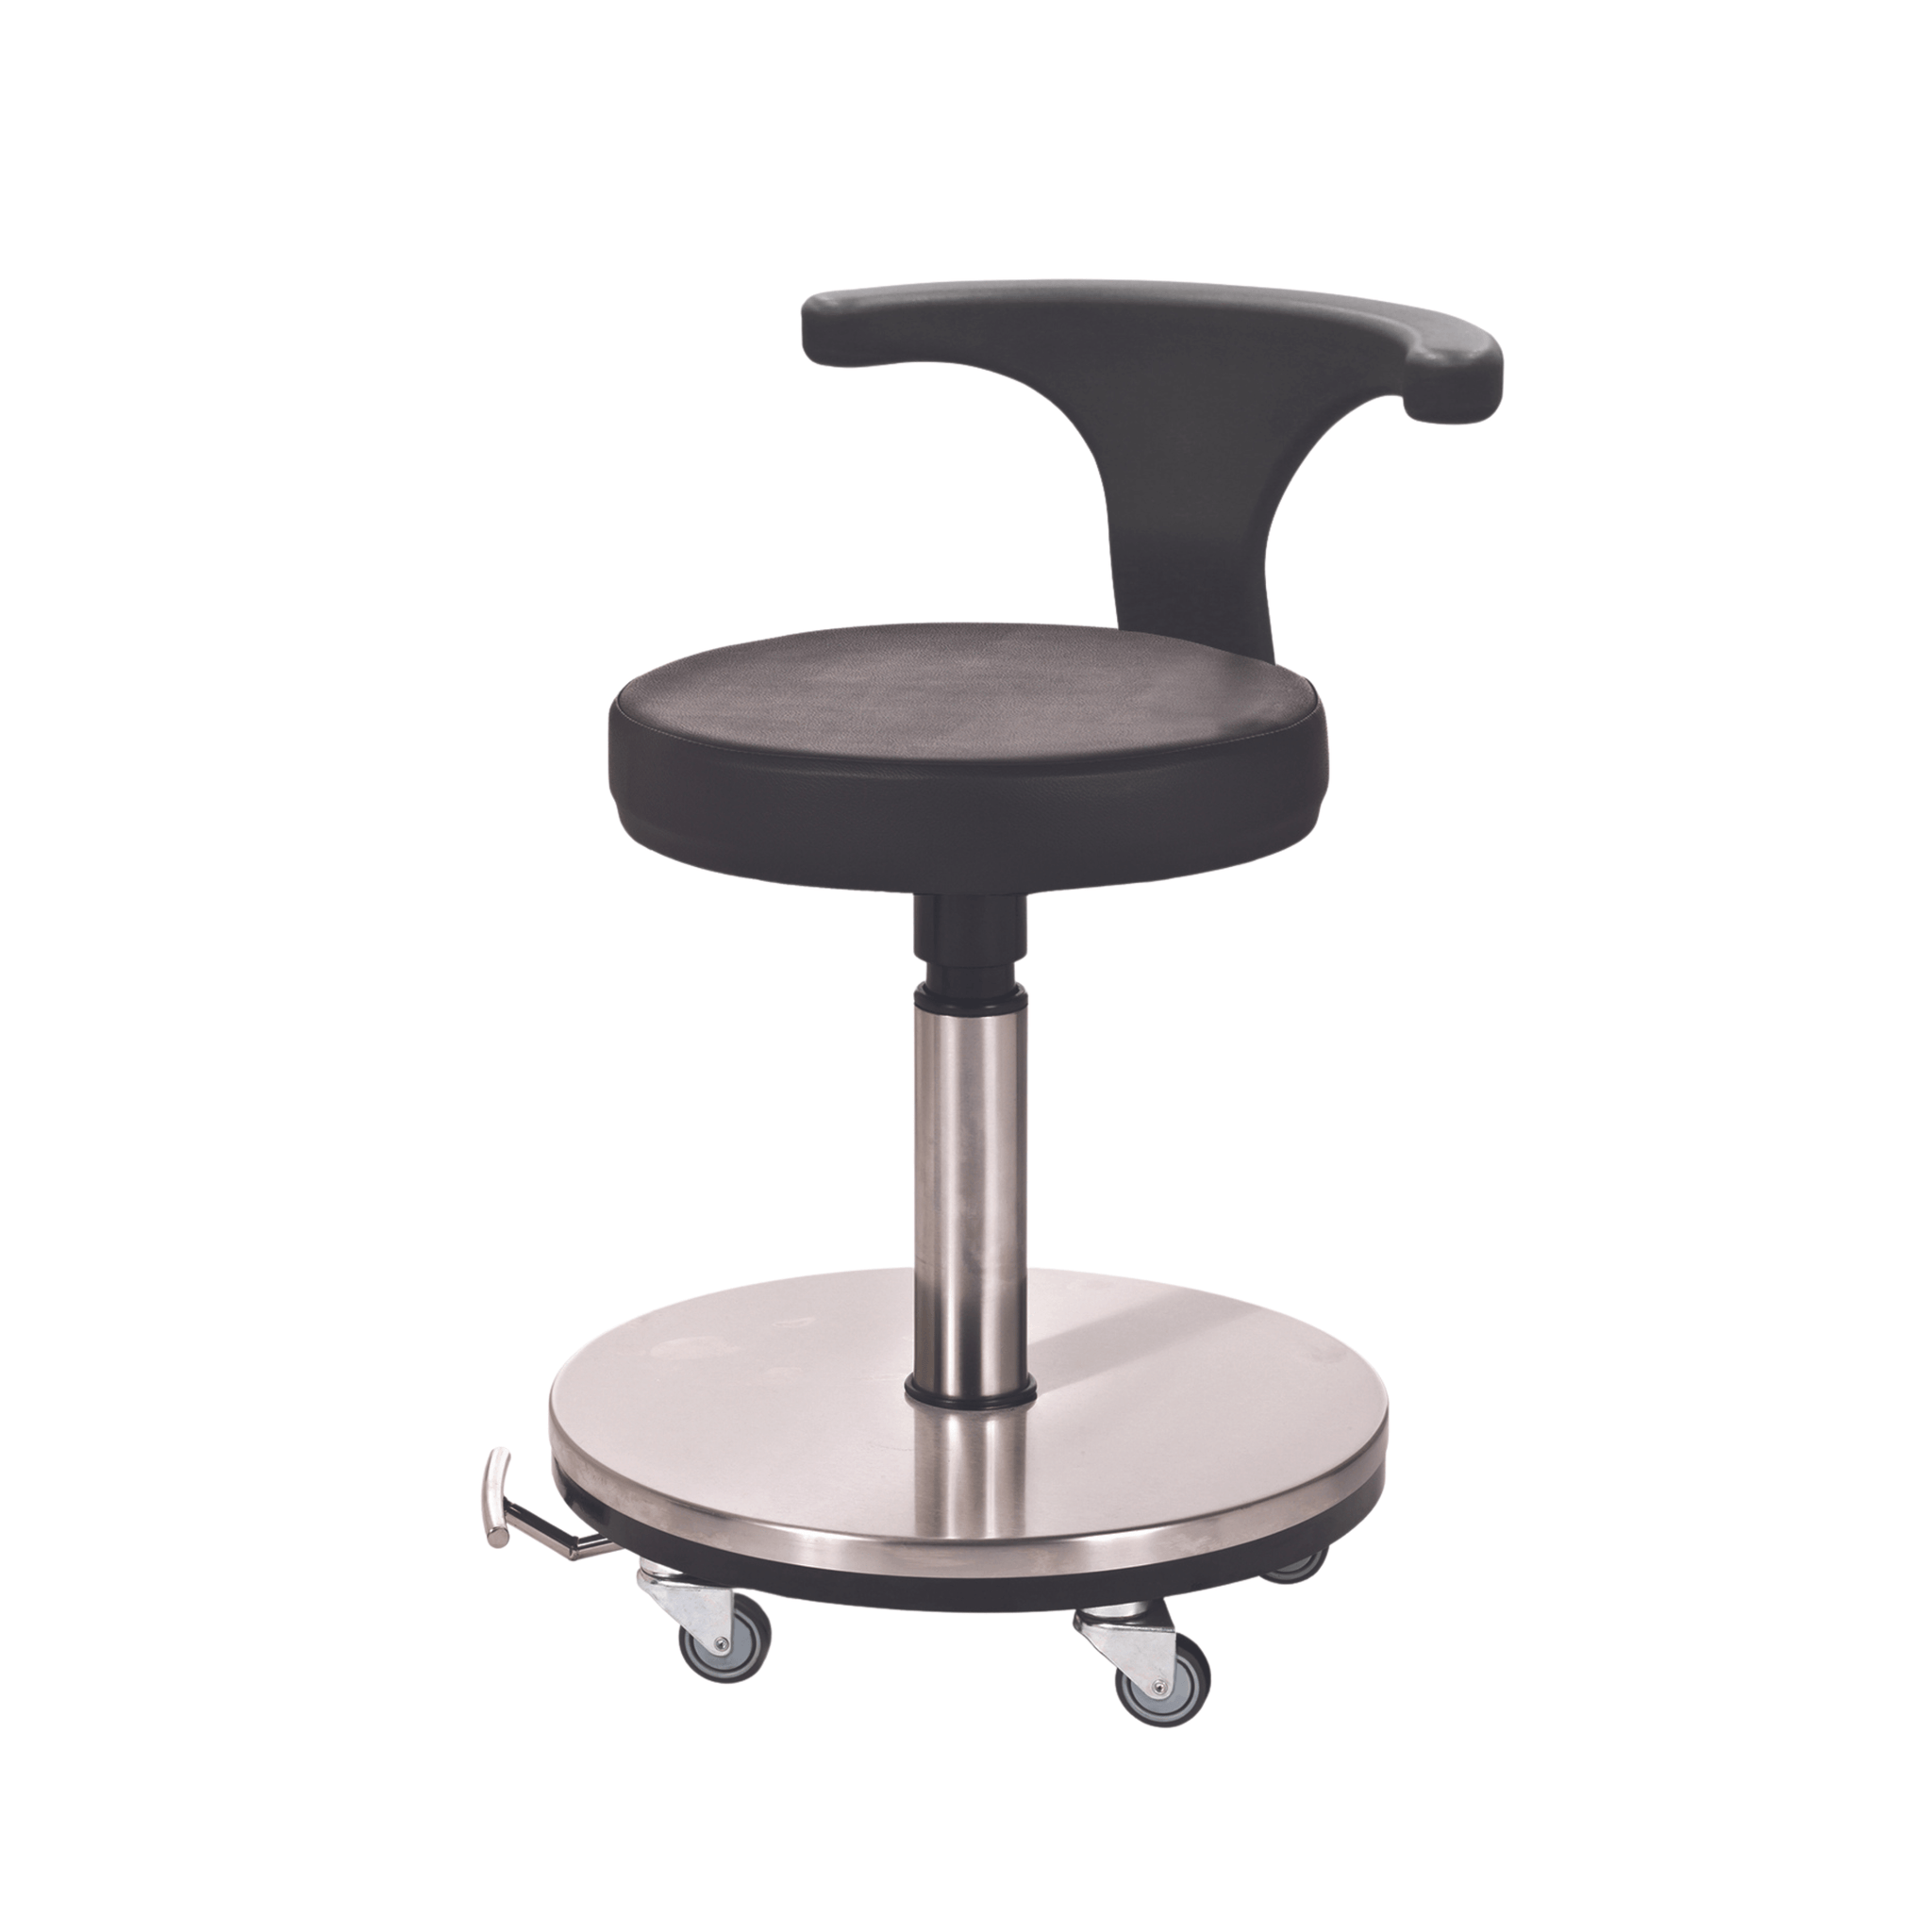 Foot Operated Surgeon Stool - With Backrest